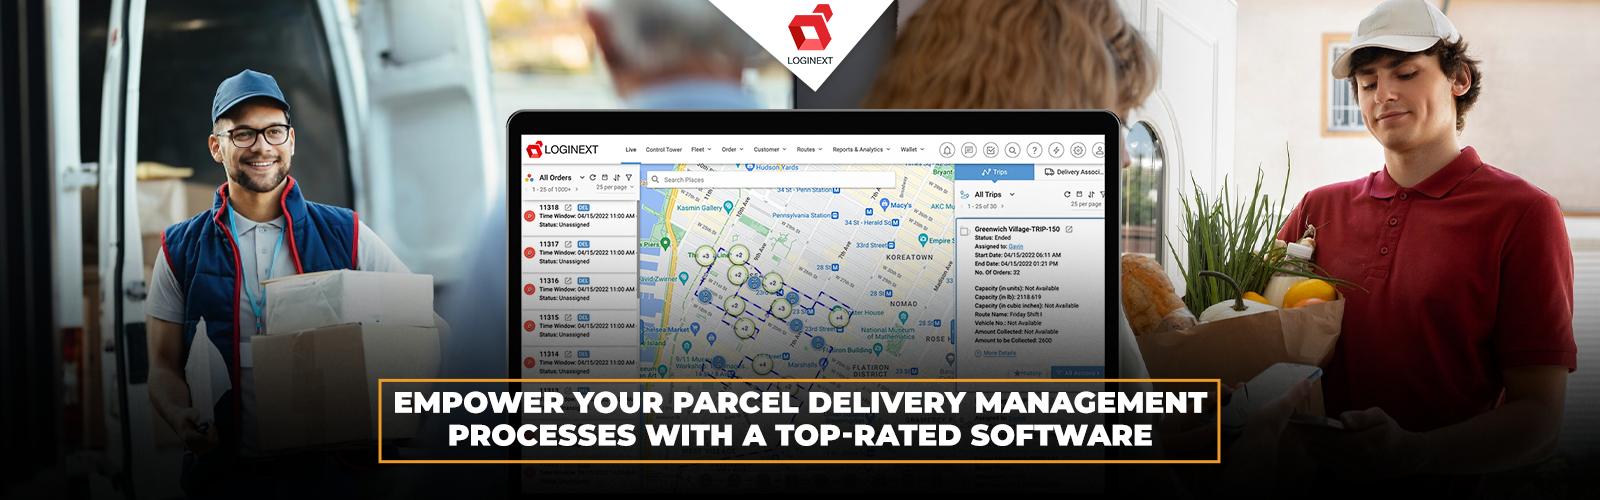 A Top-Rated Parcel Delivery Management Software For Seamless Delivery